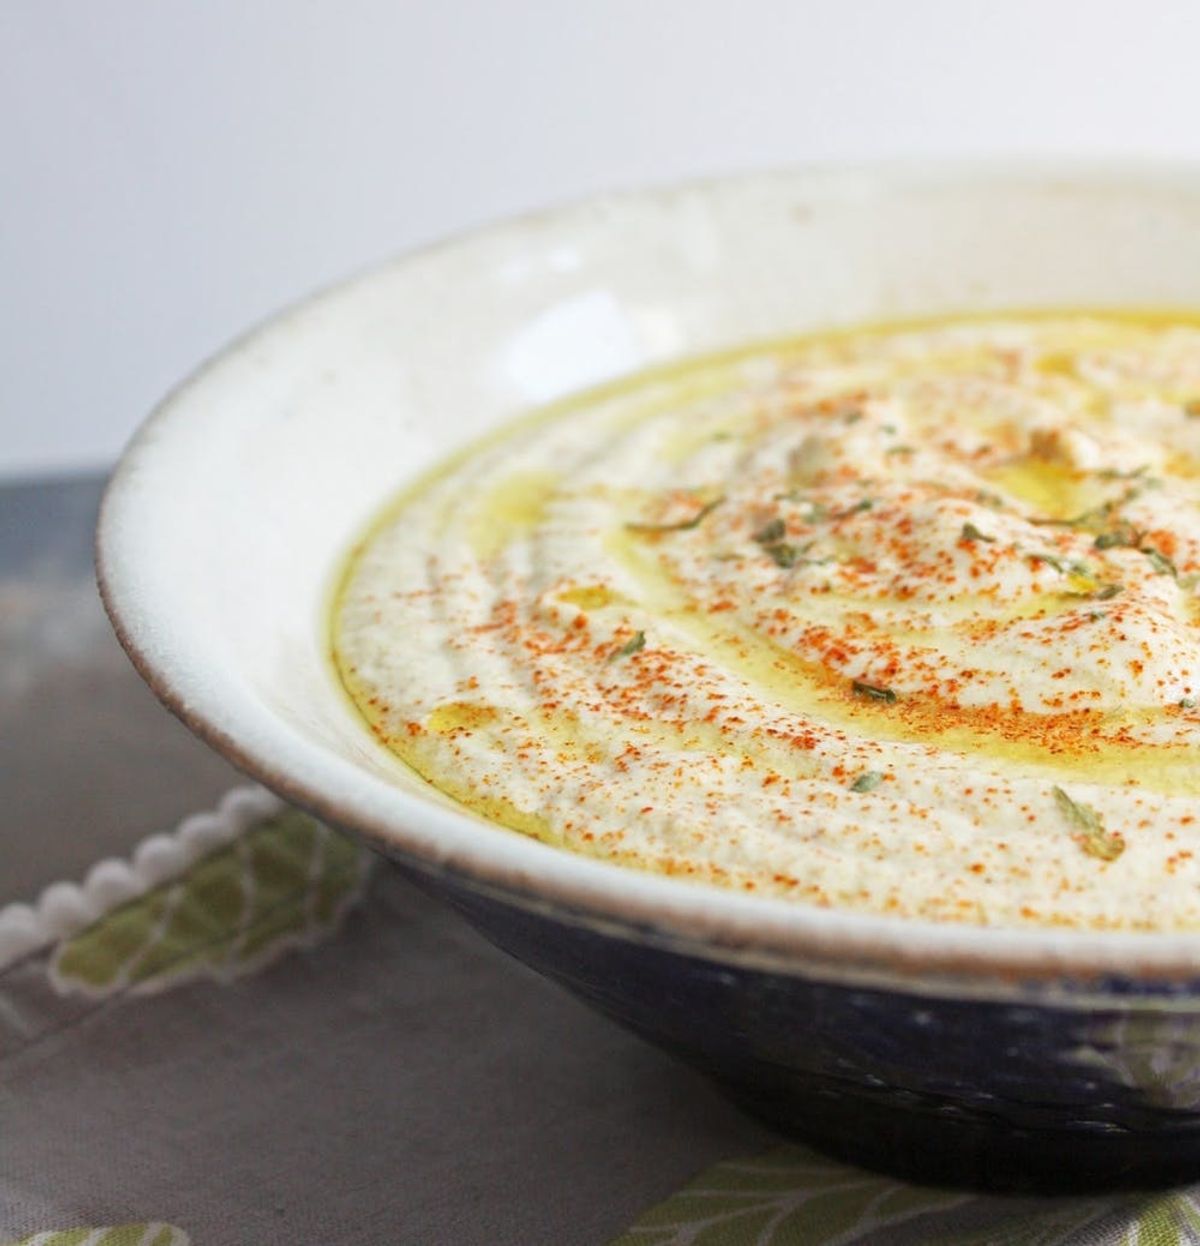 Modern Twists on an Ancient Food: 19 Unconventional Hummus Recipes